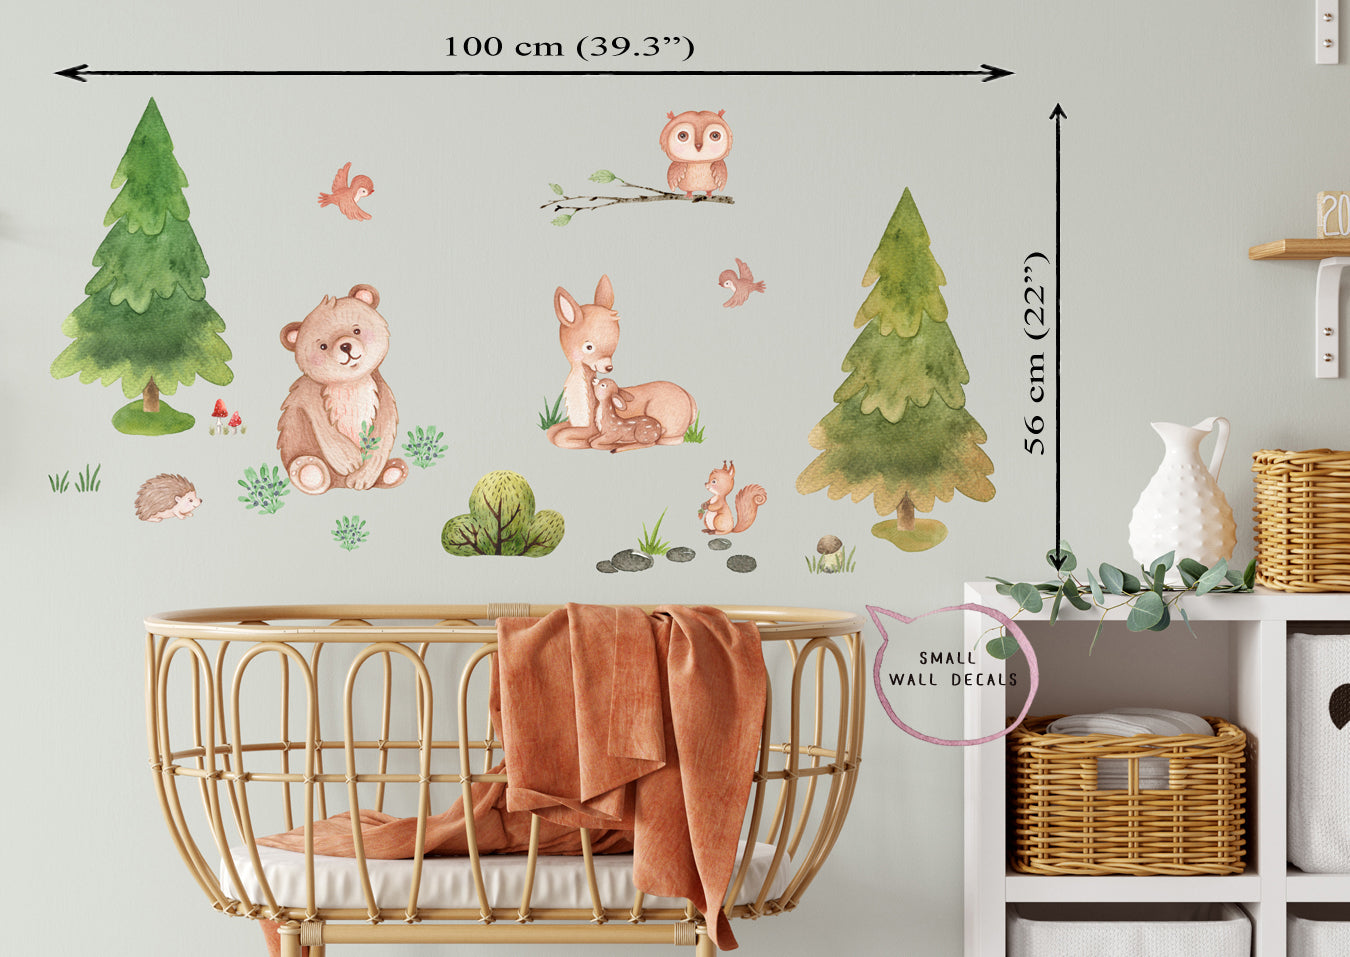 Forest animals. Small wall decals for baby's room. Tree, squirrel and owl.